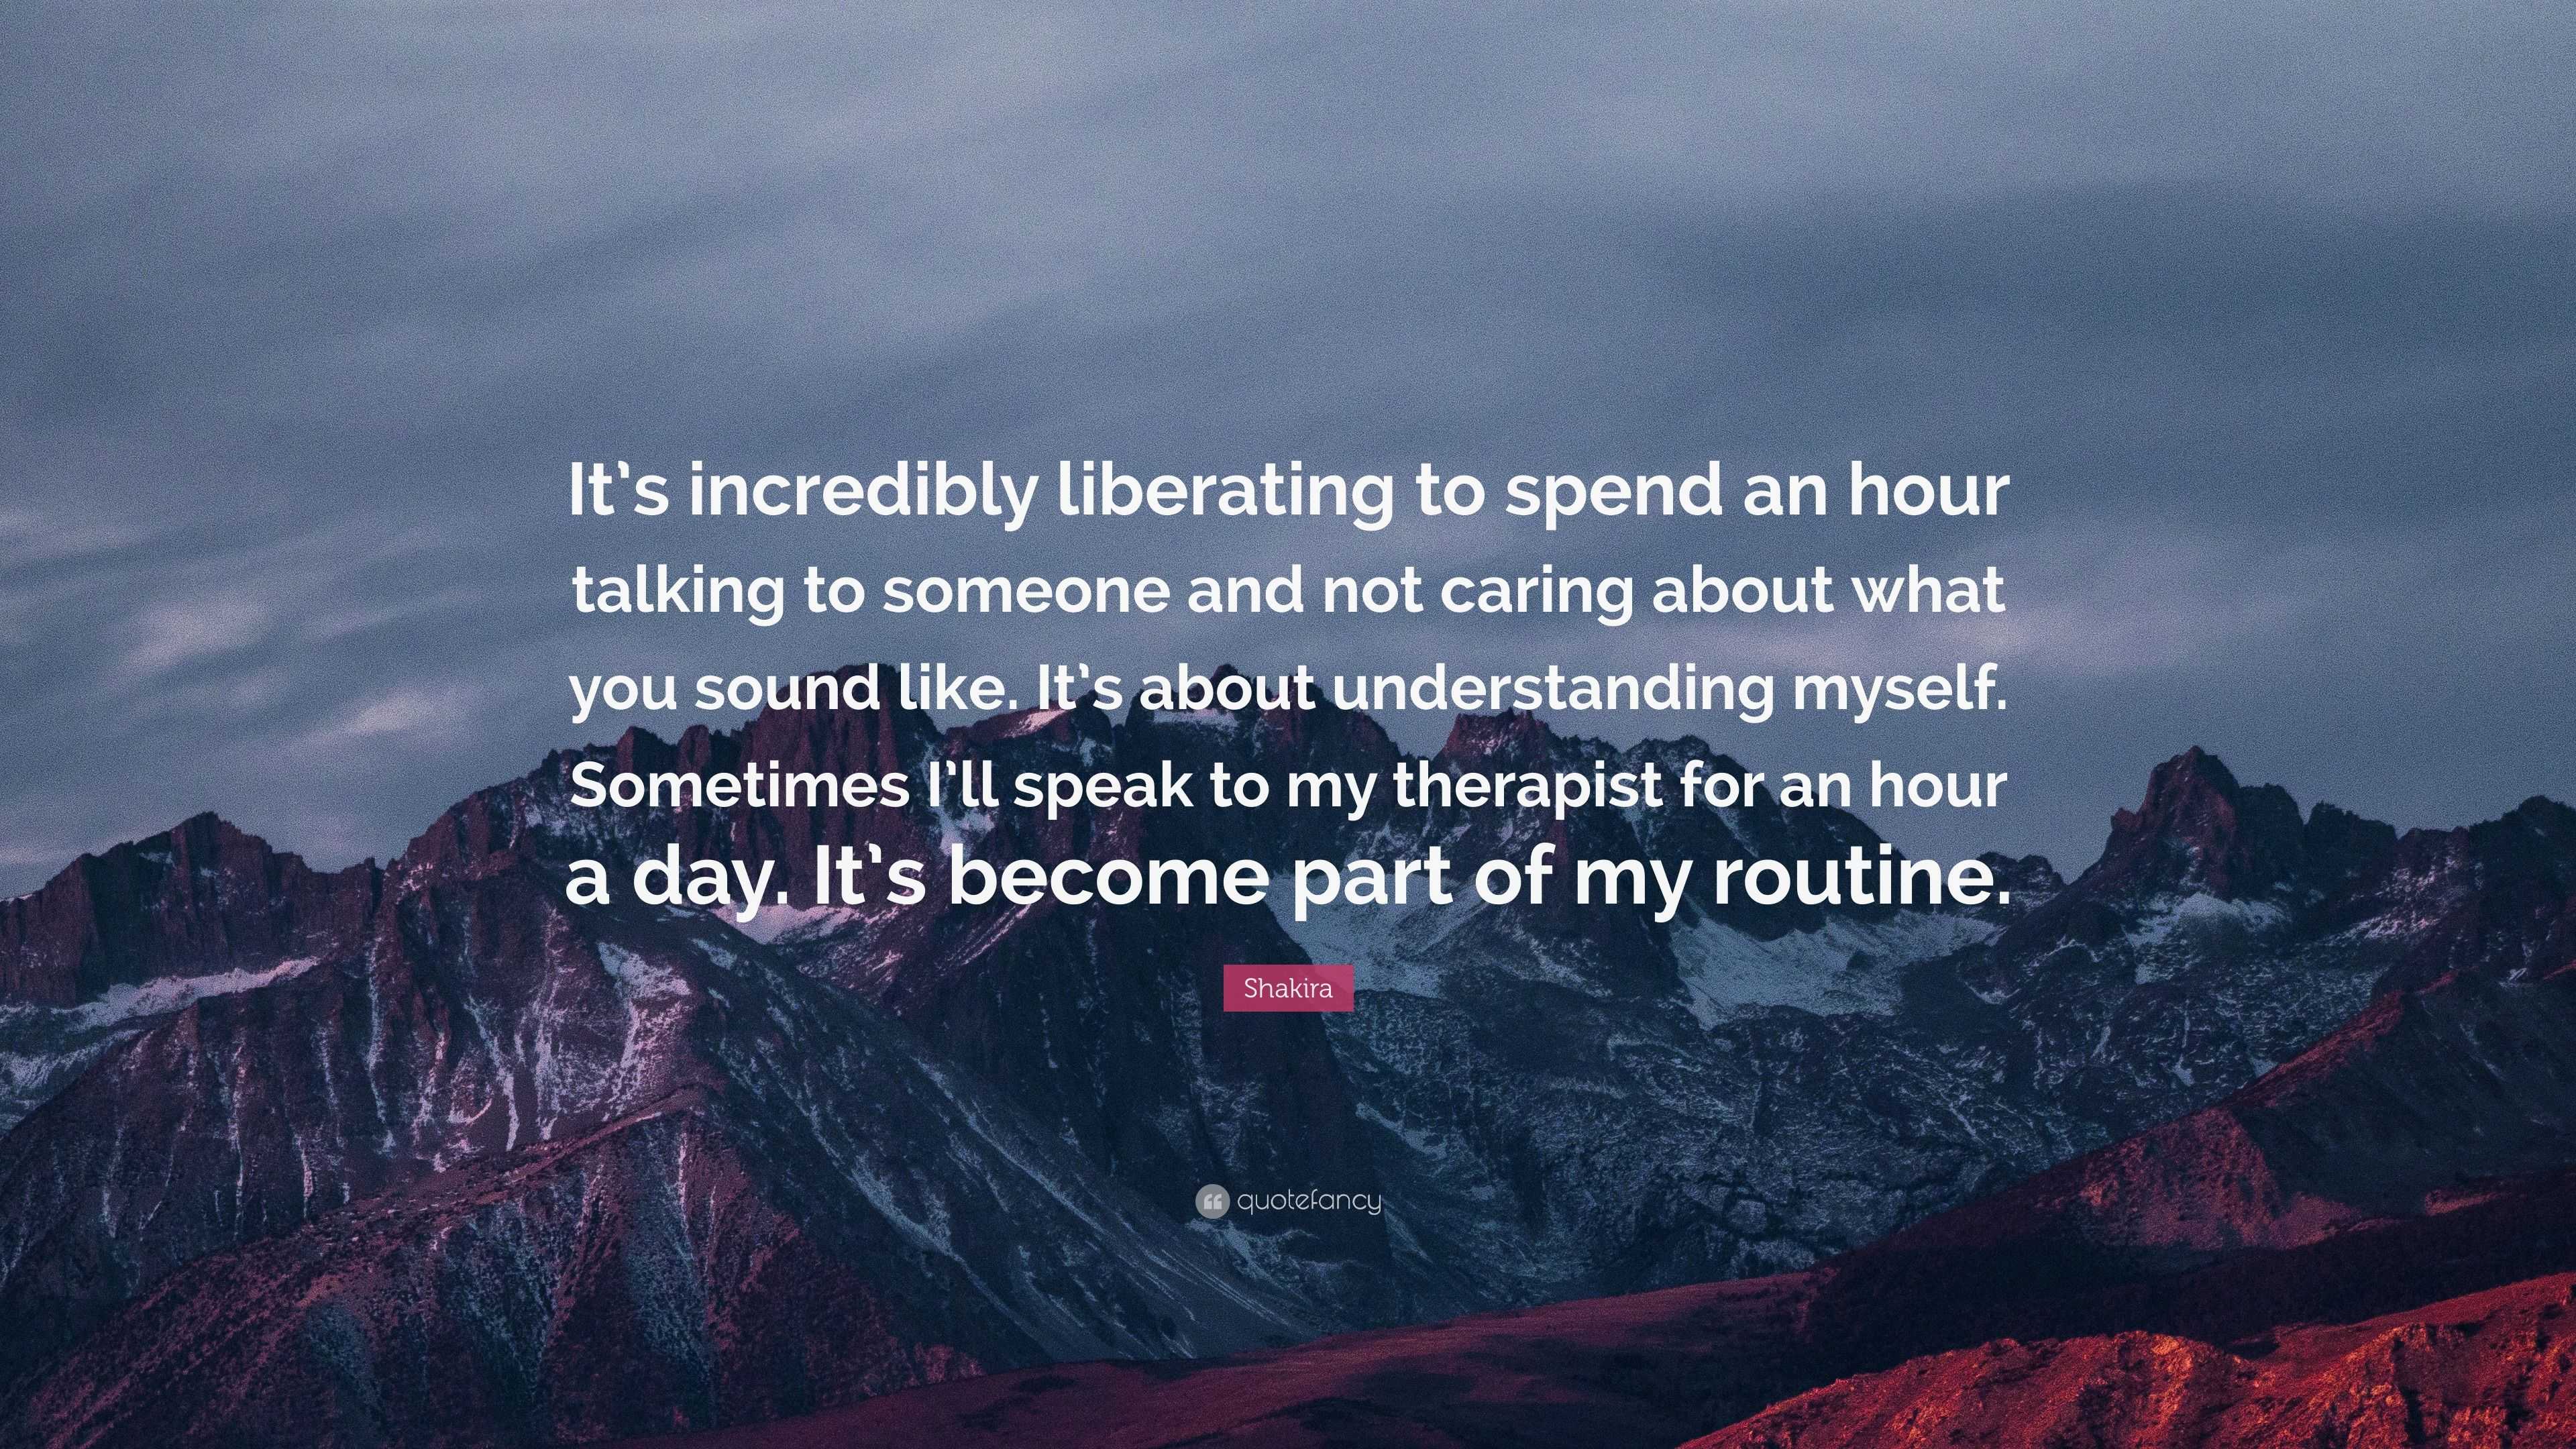 Shakira Quote: “It’s incredibly liberating to spend an hour talking to ...